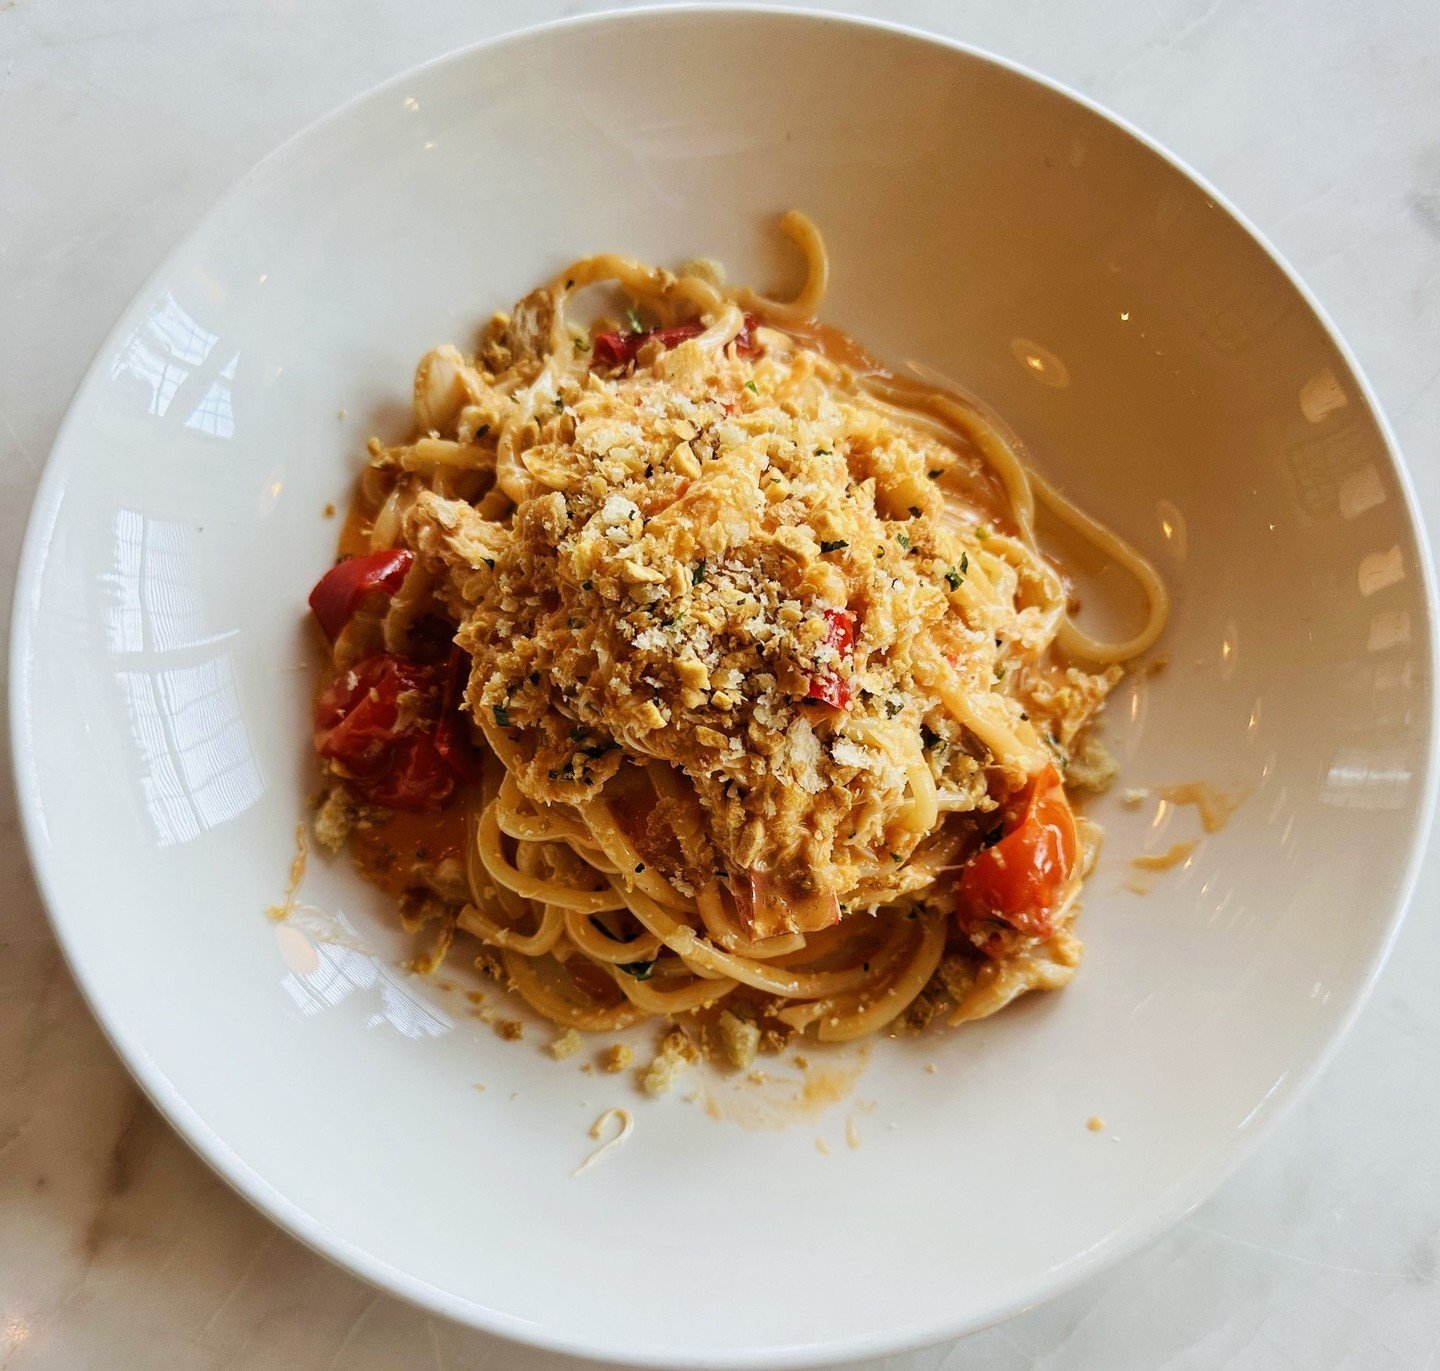 ⁠Spicy Crab Bucatini at Branch Line in Watertown may look like just another delicious bowl of pasta, but there's a serious sustainability story inside... green crab broth. ⁠
⁠
Says Chef ⁠Michael Morway: &quot;I love using green crabs because they are